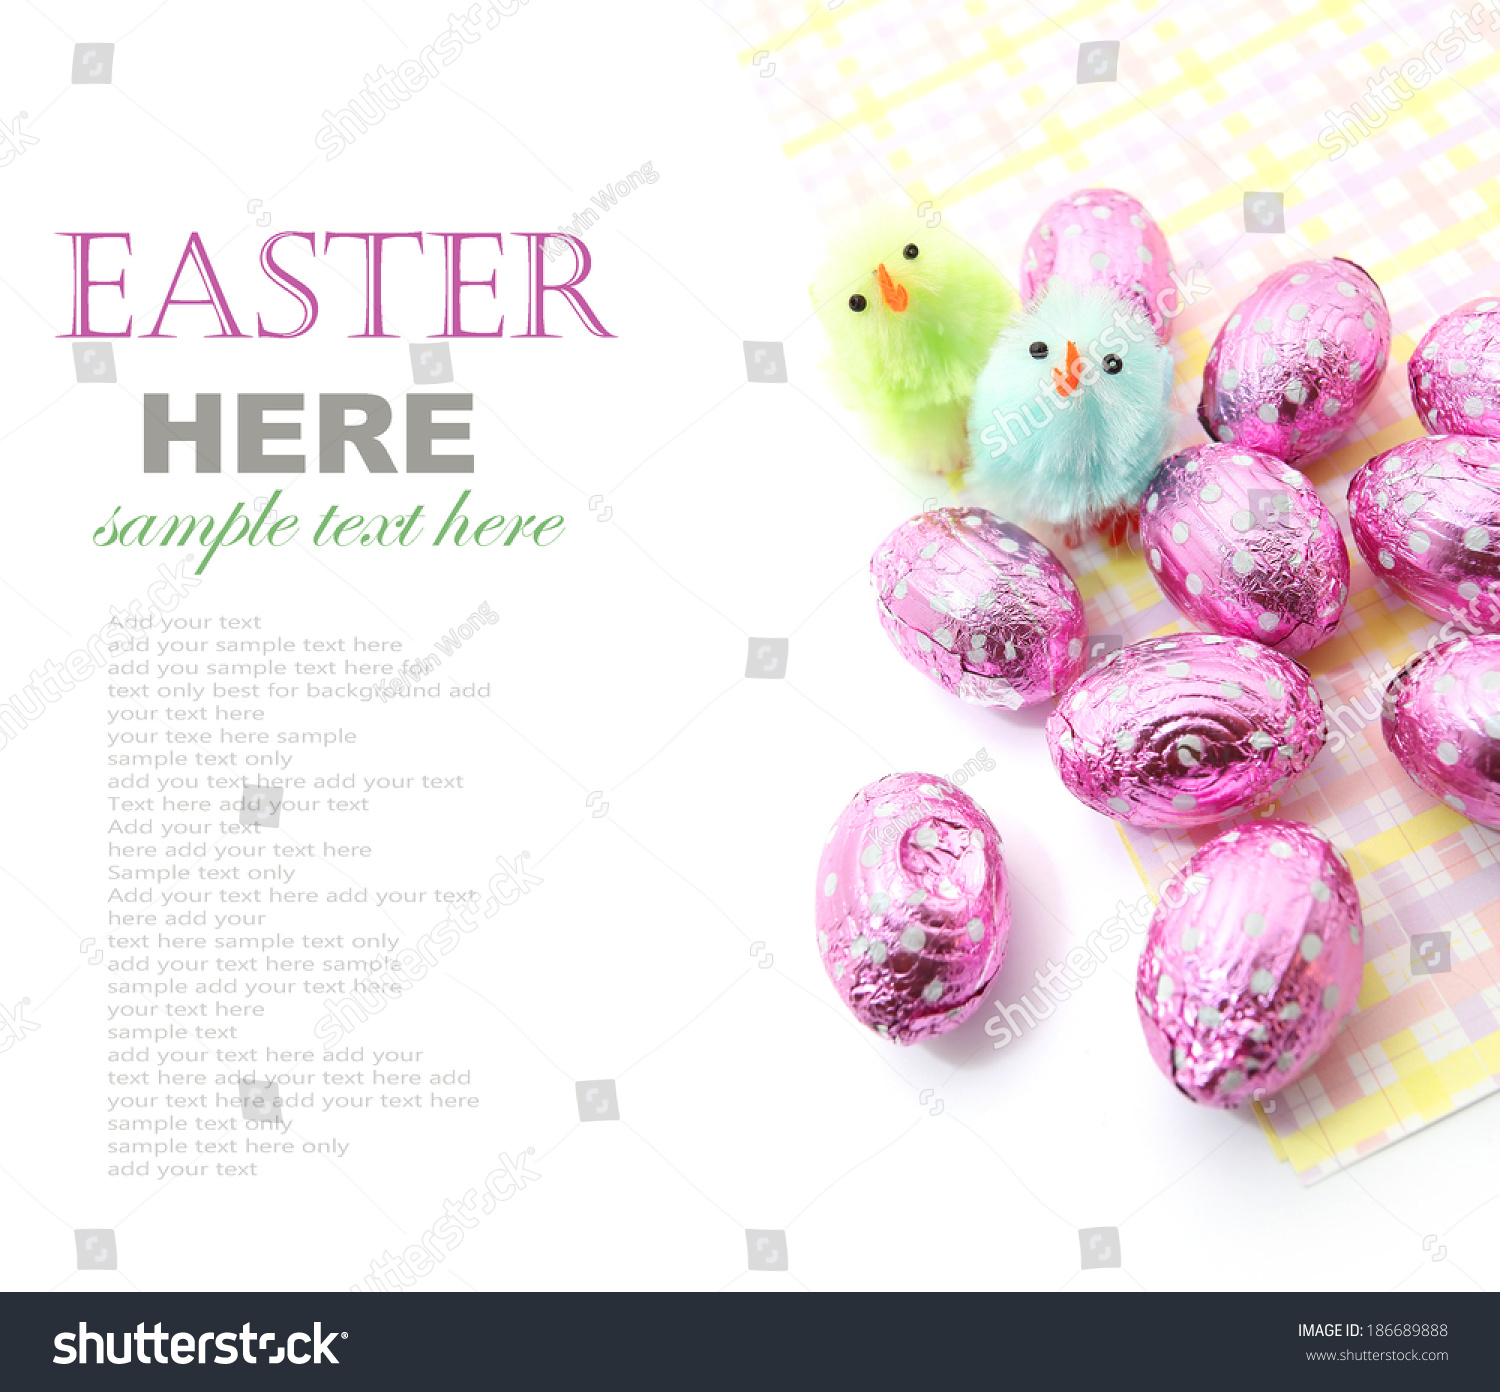 Colorful Easter chocolate eggs with little Easter chicken isolated on white  #186689888